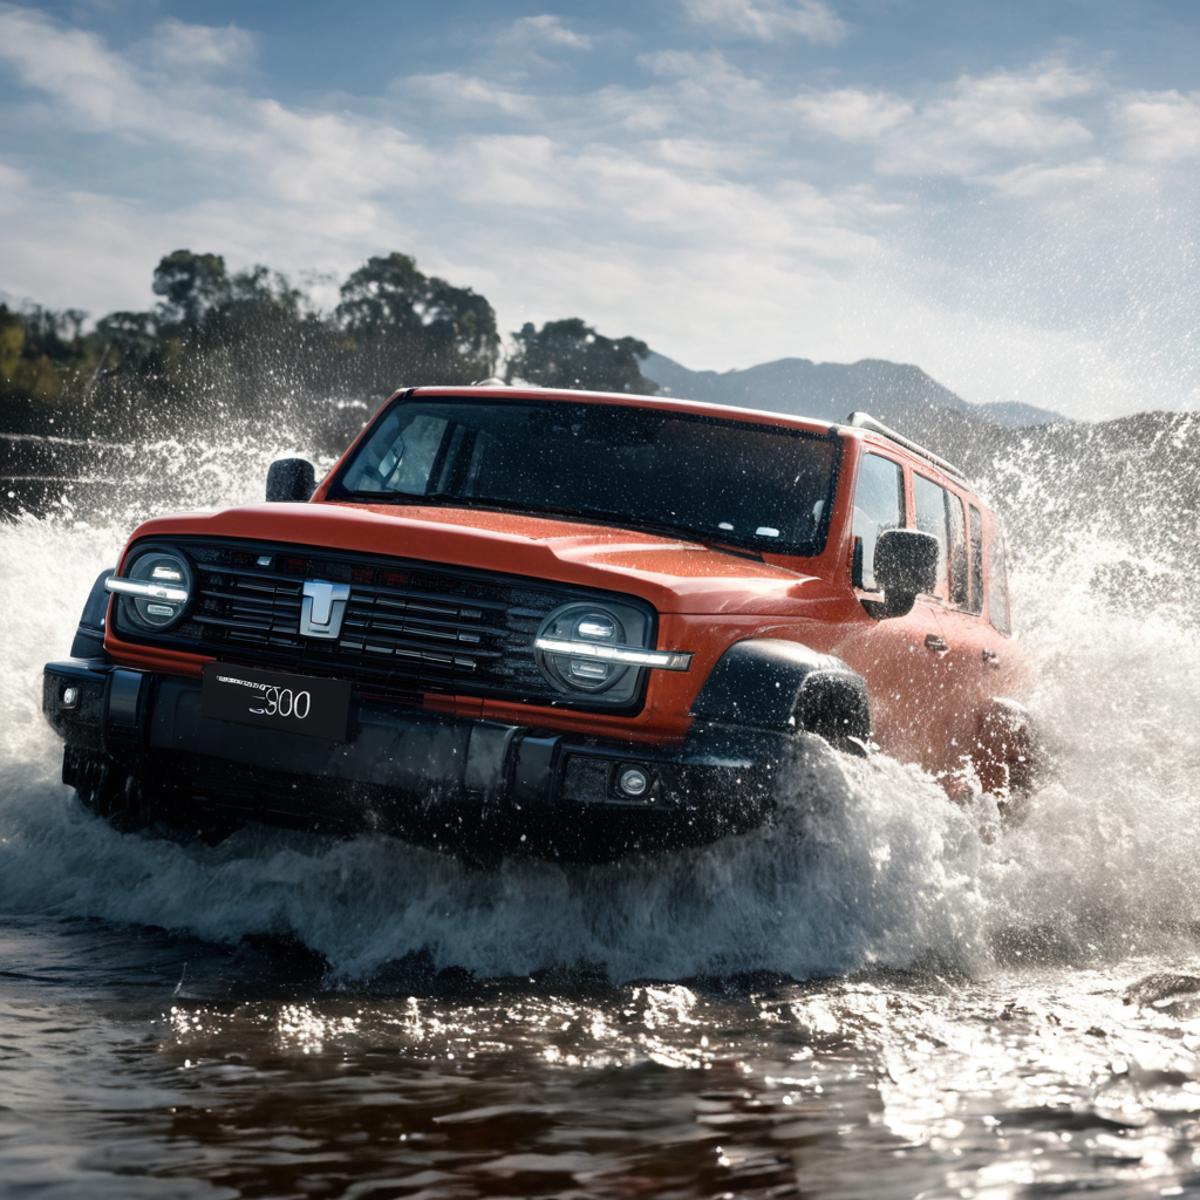 A red Jeep driving through a river, surrounded by splashing water.